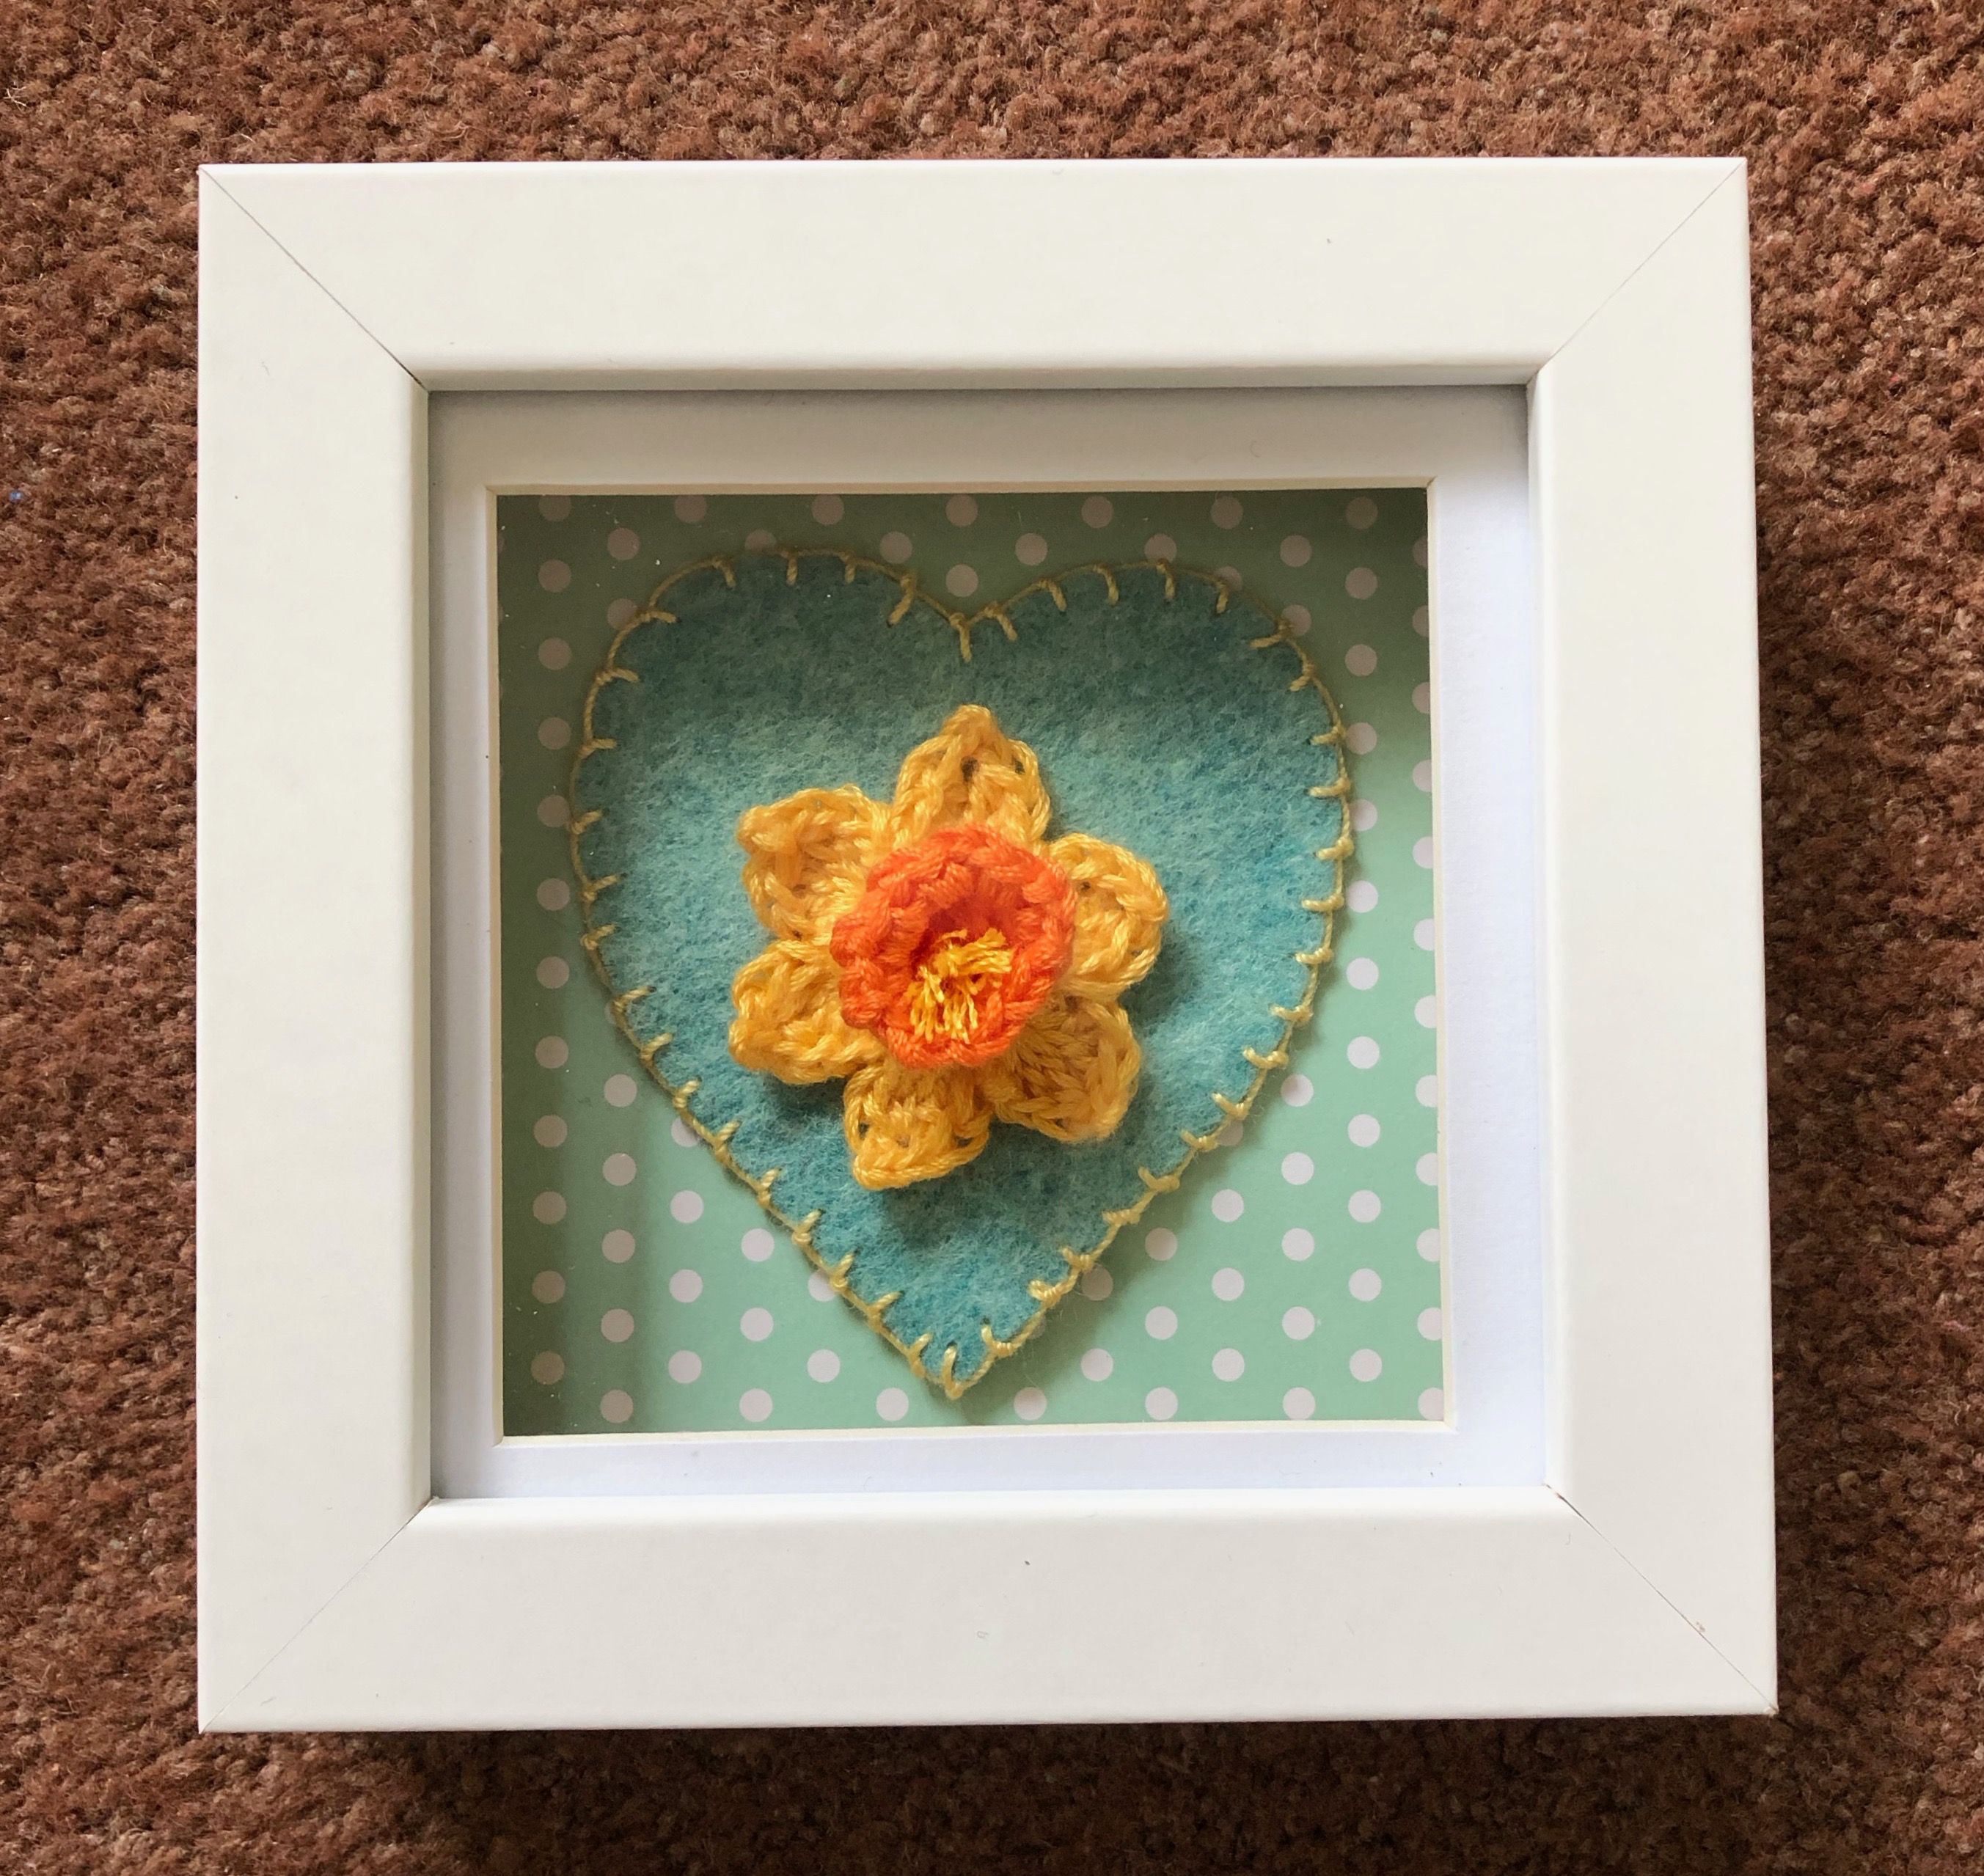 A small white wooden framed picture with a single handmade, crocheted yellow and orange daffodil on top of a hand stitched green and yellow felt heart on a green and white spotty background.